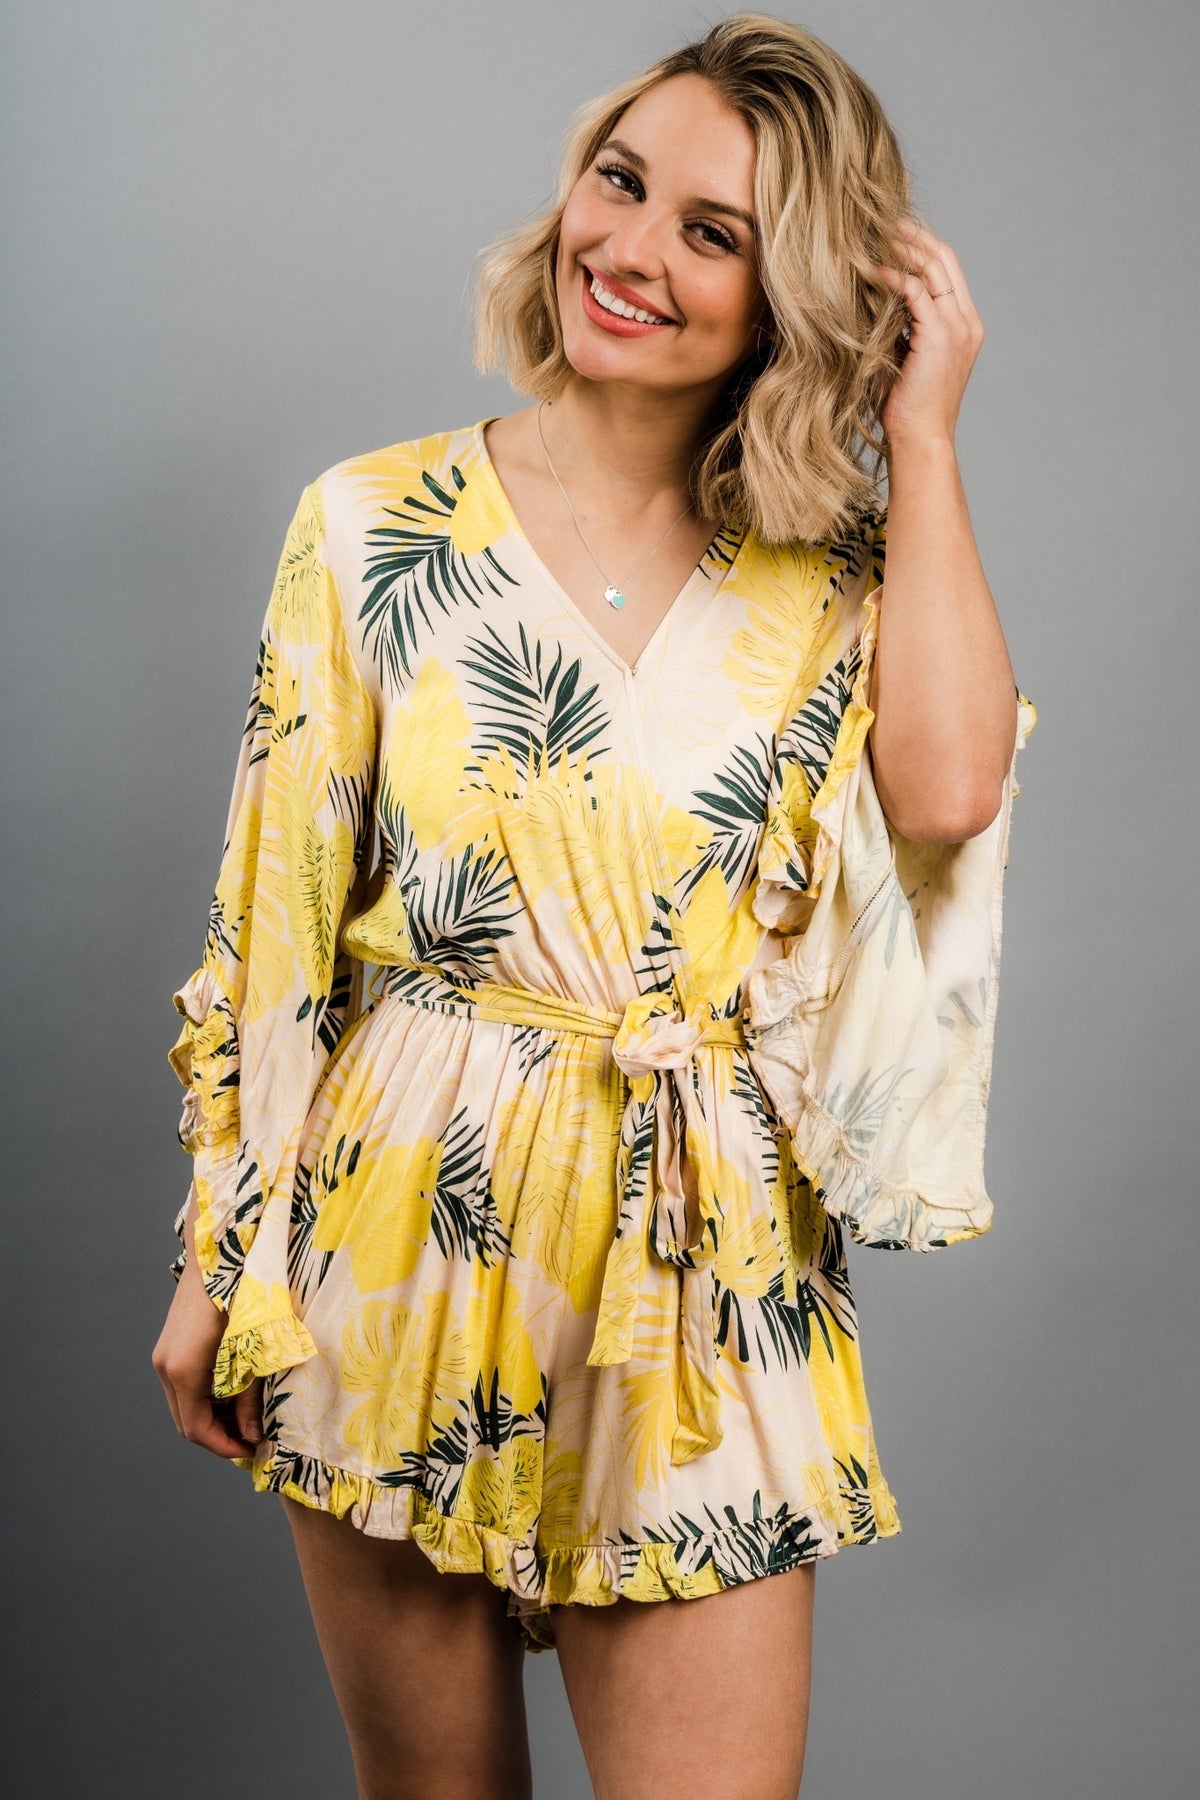 Ruffle tie waist tropical print romper apricot multi - Cute Romper - Trendy Rompers and Pantsuits at Lush Fashion Lounge Boutique in Oklahoma City